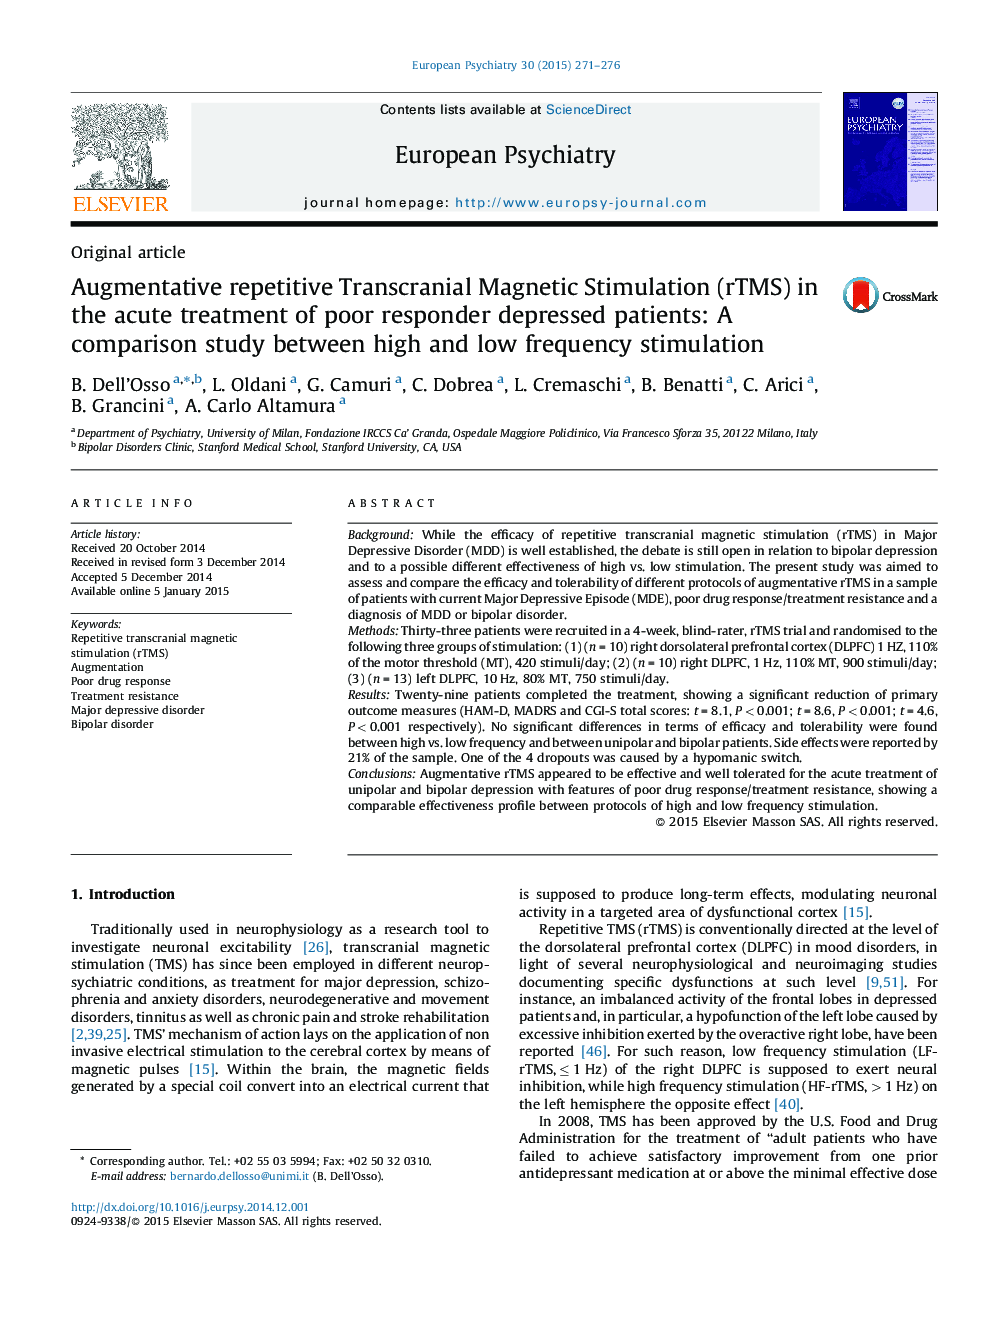 Augmentative repetitive Transcranial Magnetic Stimulation (rTMS) in the acute treatment of poor responder depressed patients: A comparison study between high and low frequency stimulation